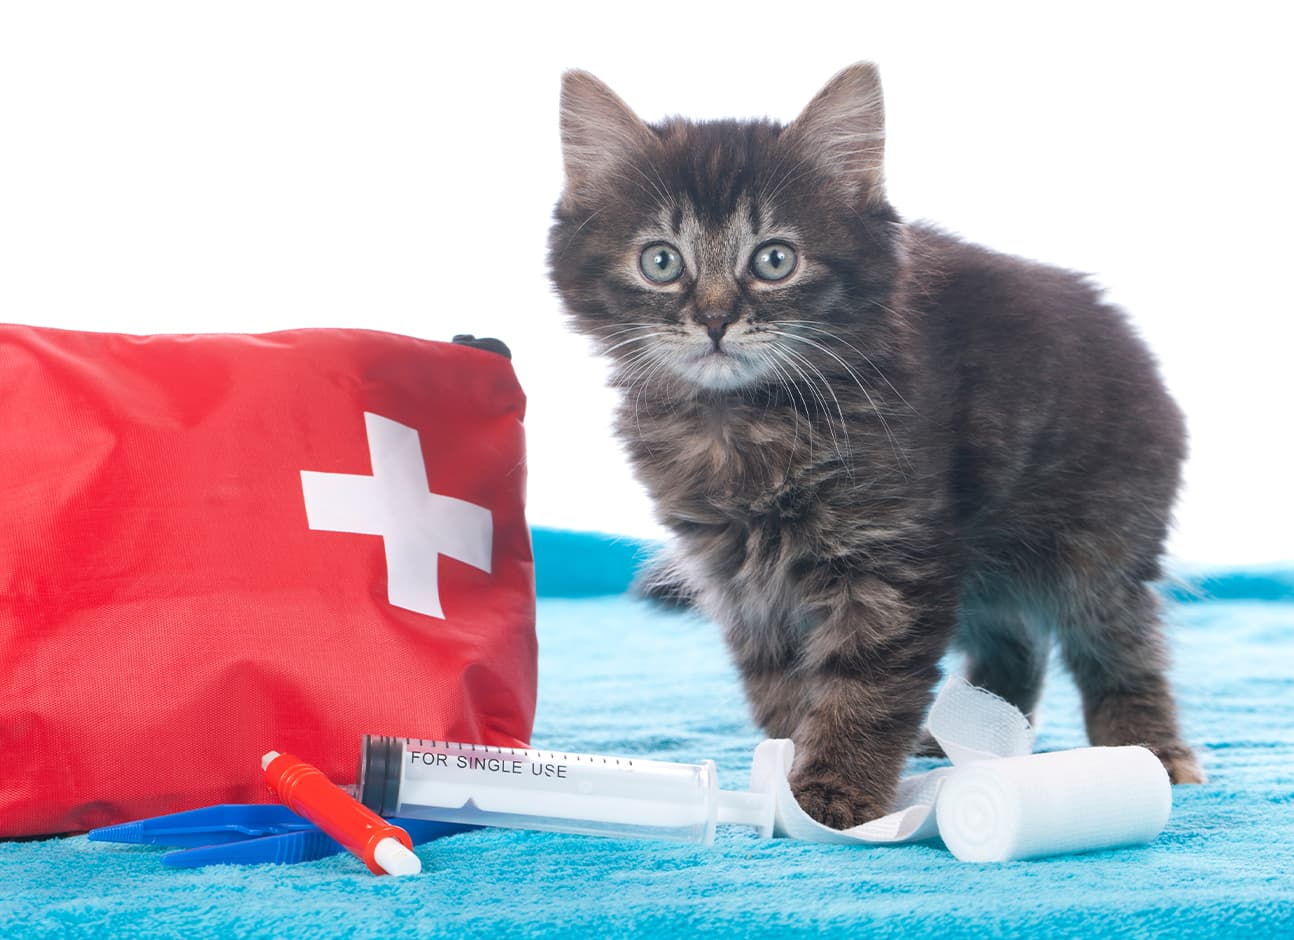 EMERGENCY KIT CHECKLIST FOR CATS AND DOGS